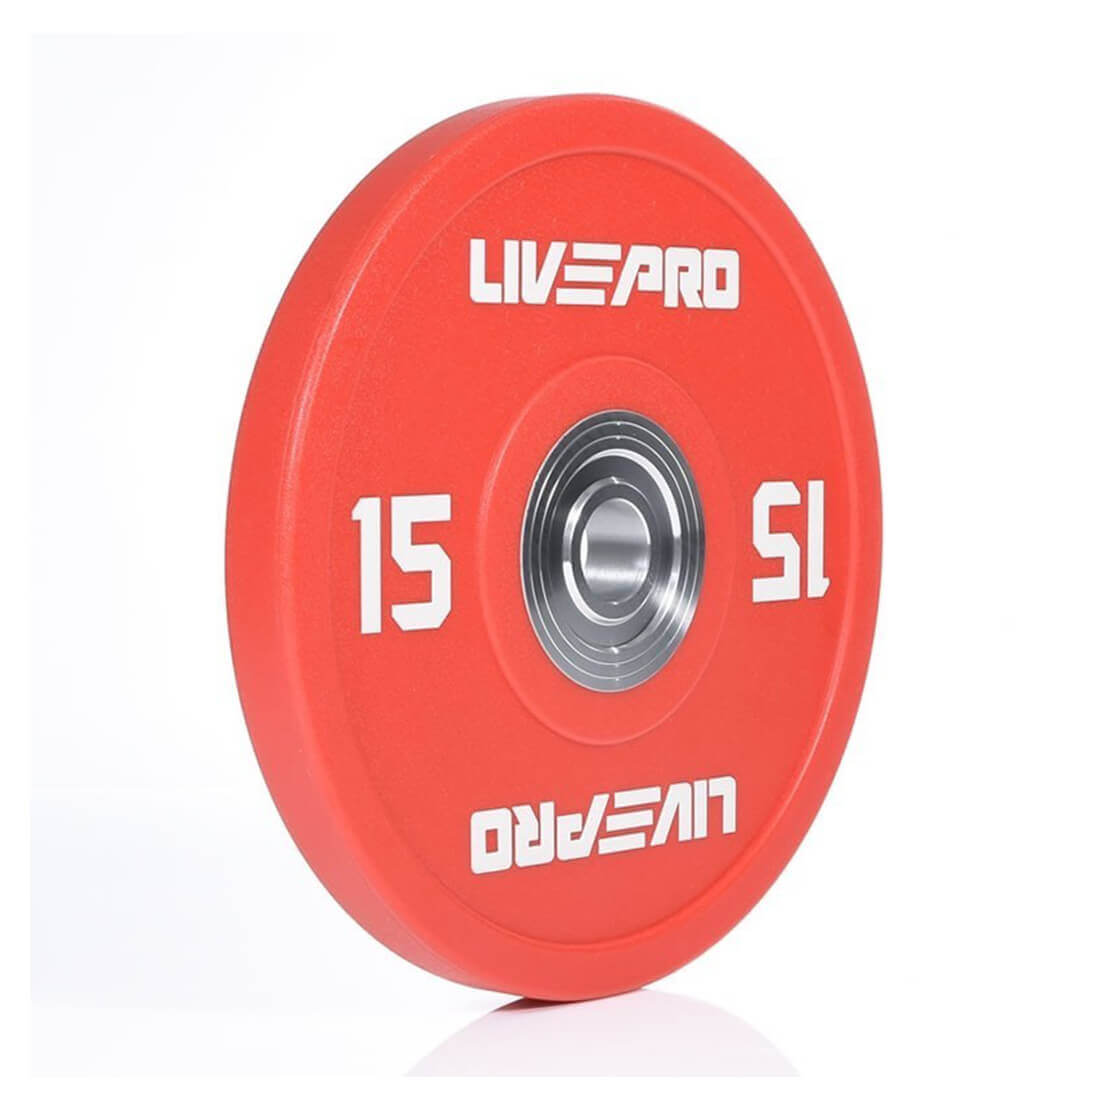 Livepro Urethane Competition Bumper Plates - Sold As Pair (10 to 25kg)